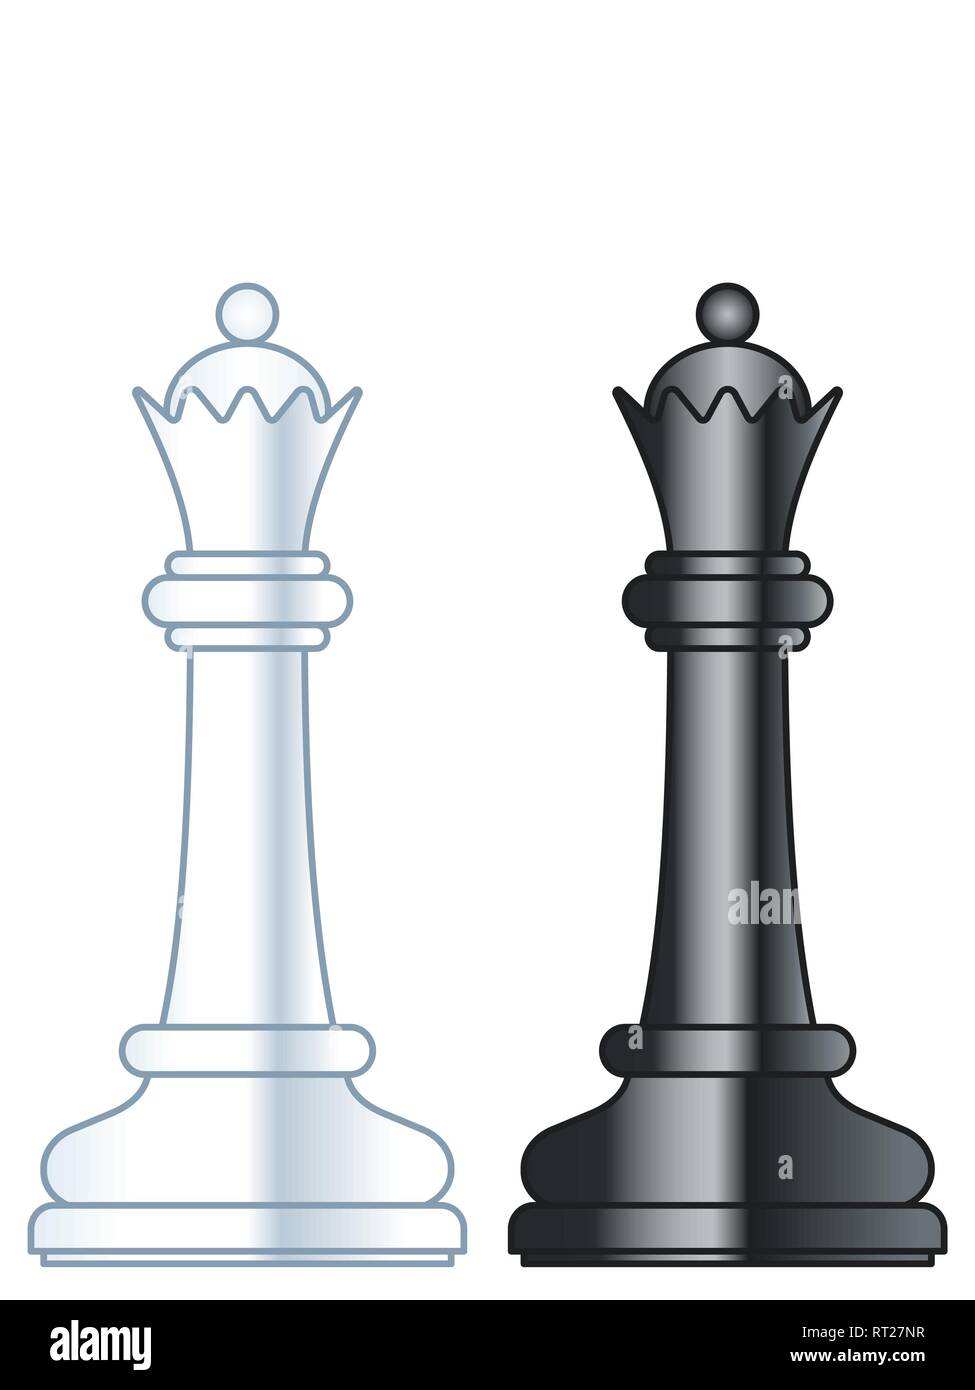 The Starting Positions Of The Chess Pieces On The Chess Board Royalty Free  SVG, Cliparts, Vectors, and Stock Illustration. Image 9275420.